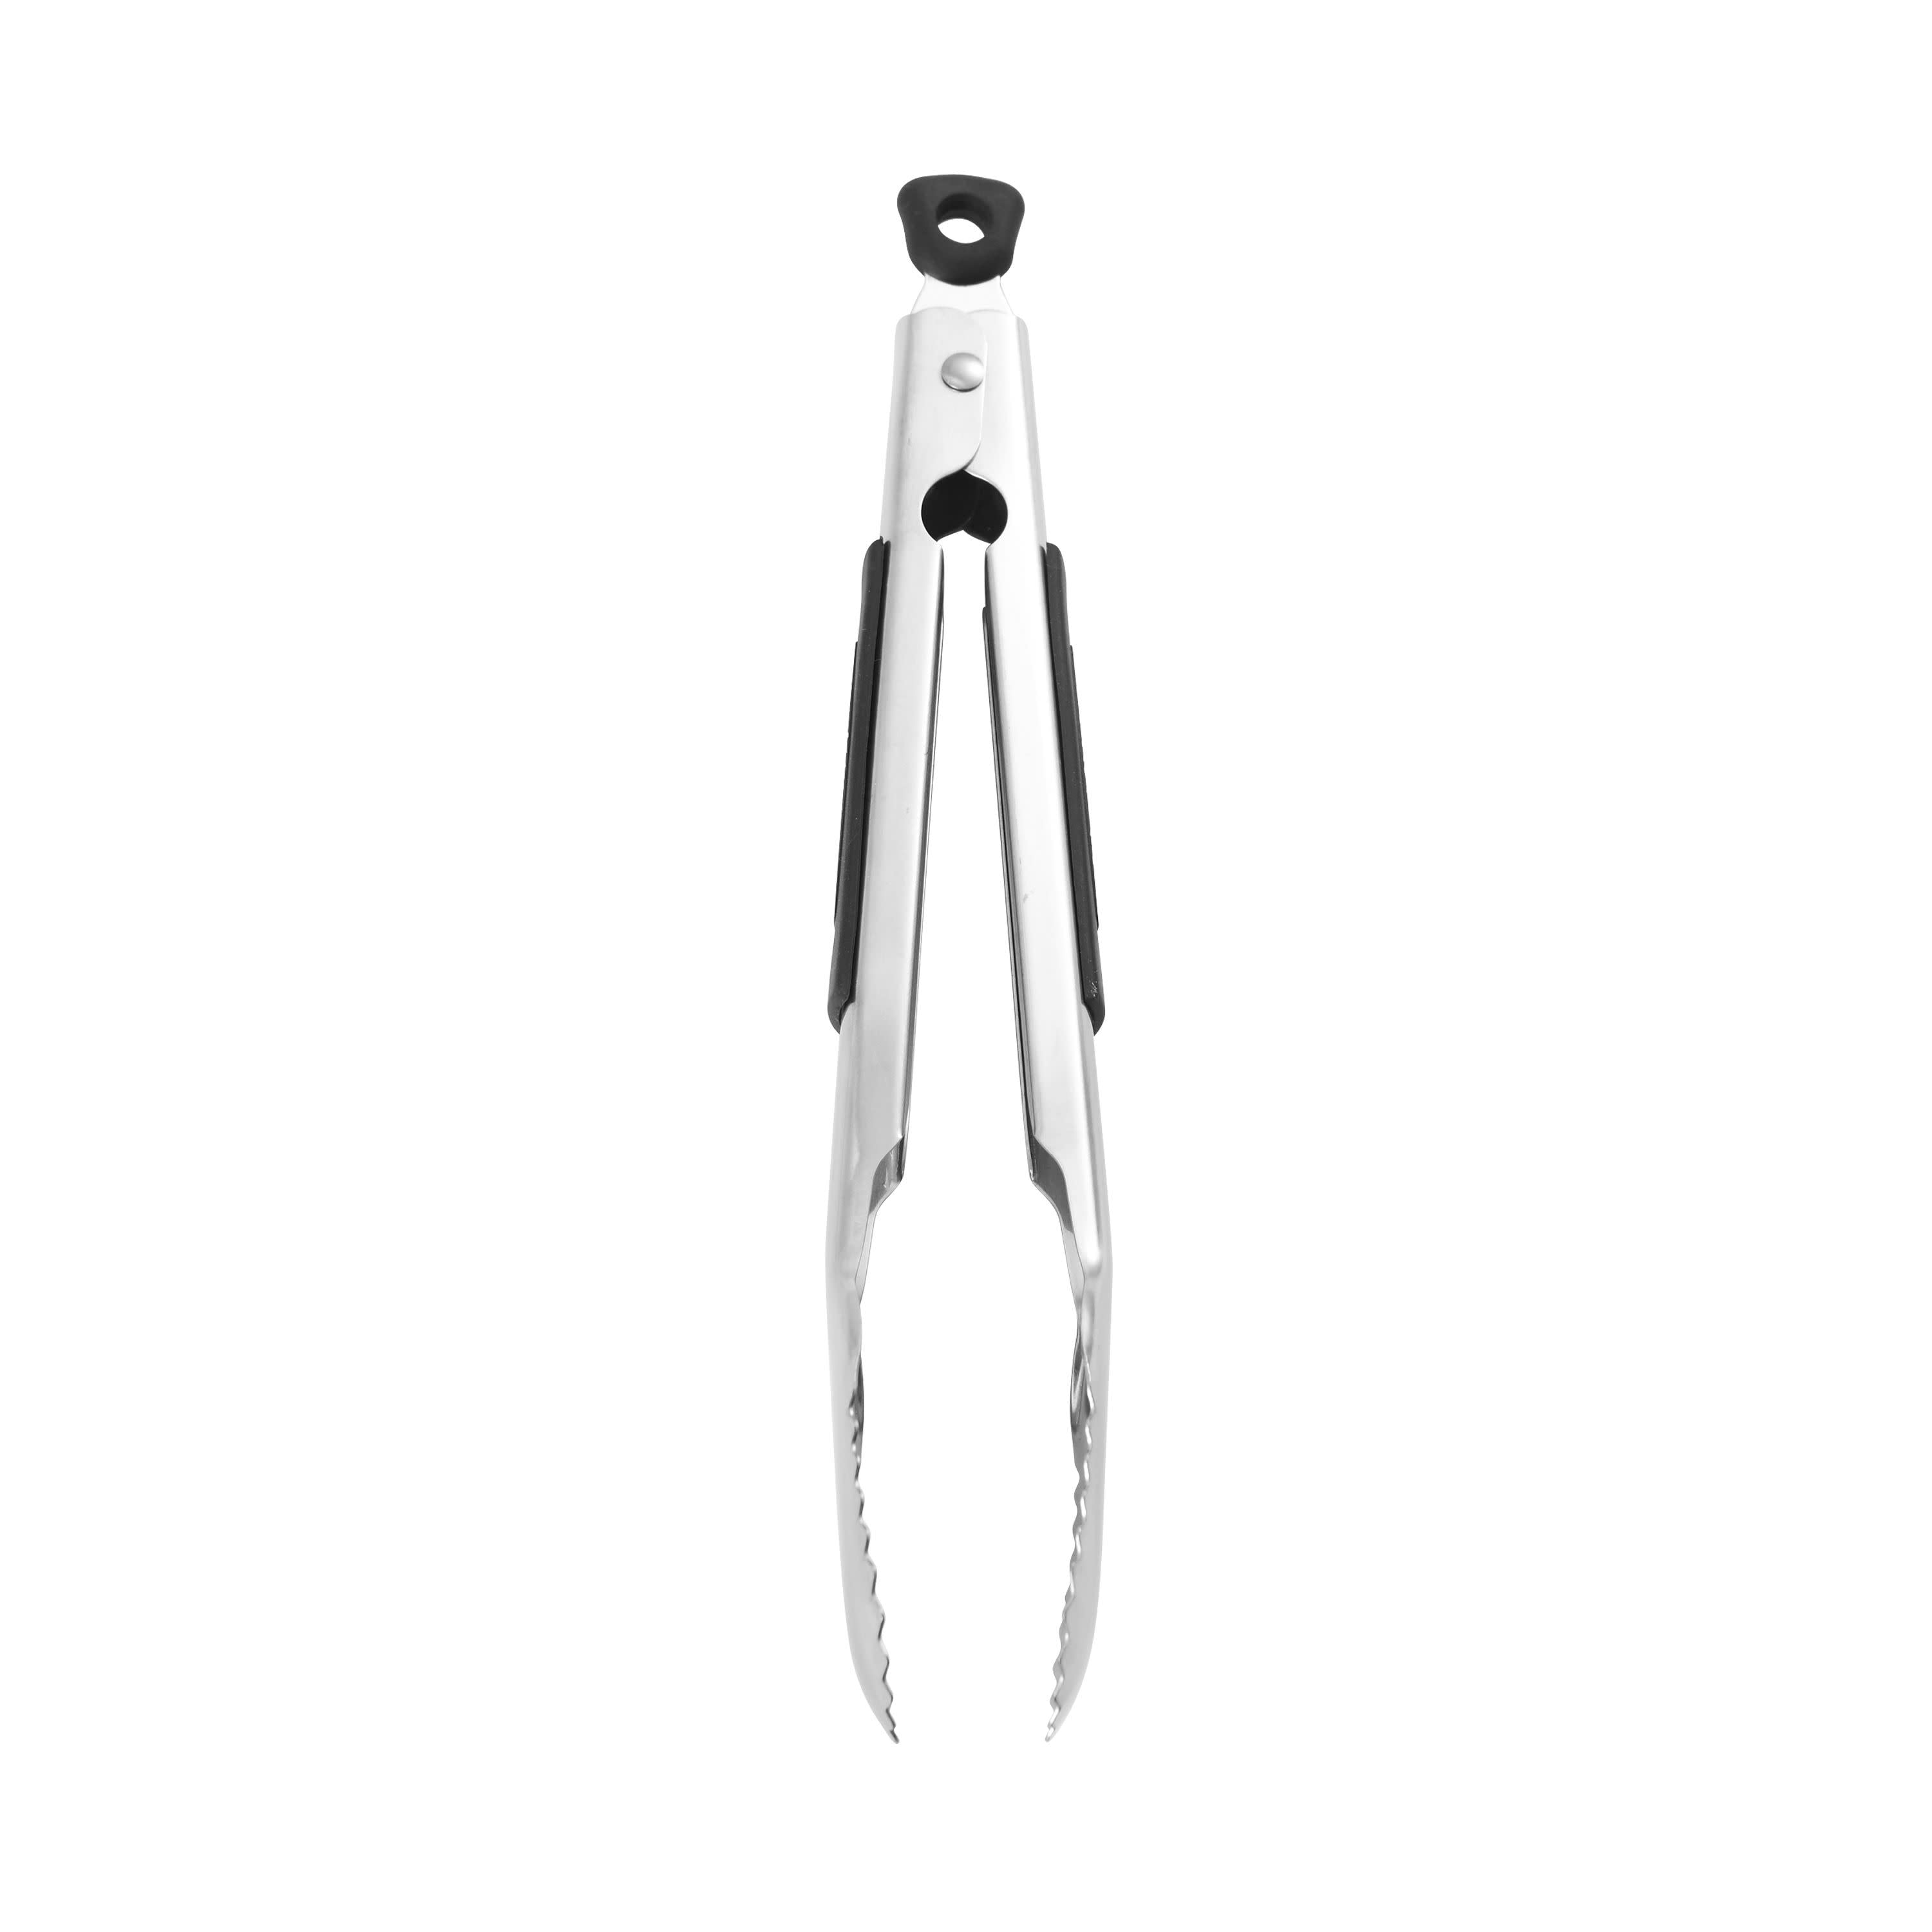 Fairmont Tongs with Cushion Grips MT14020 - Food Tongs 